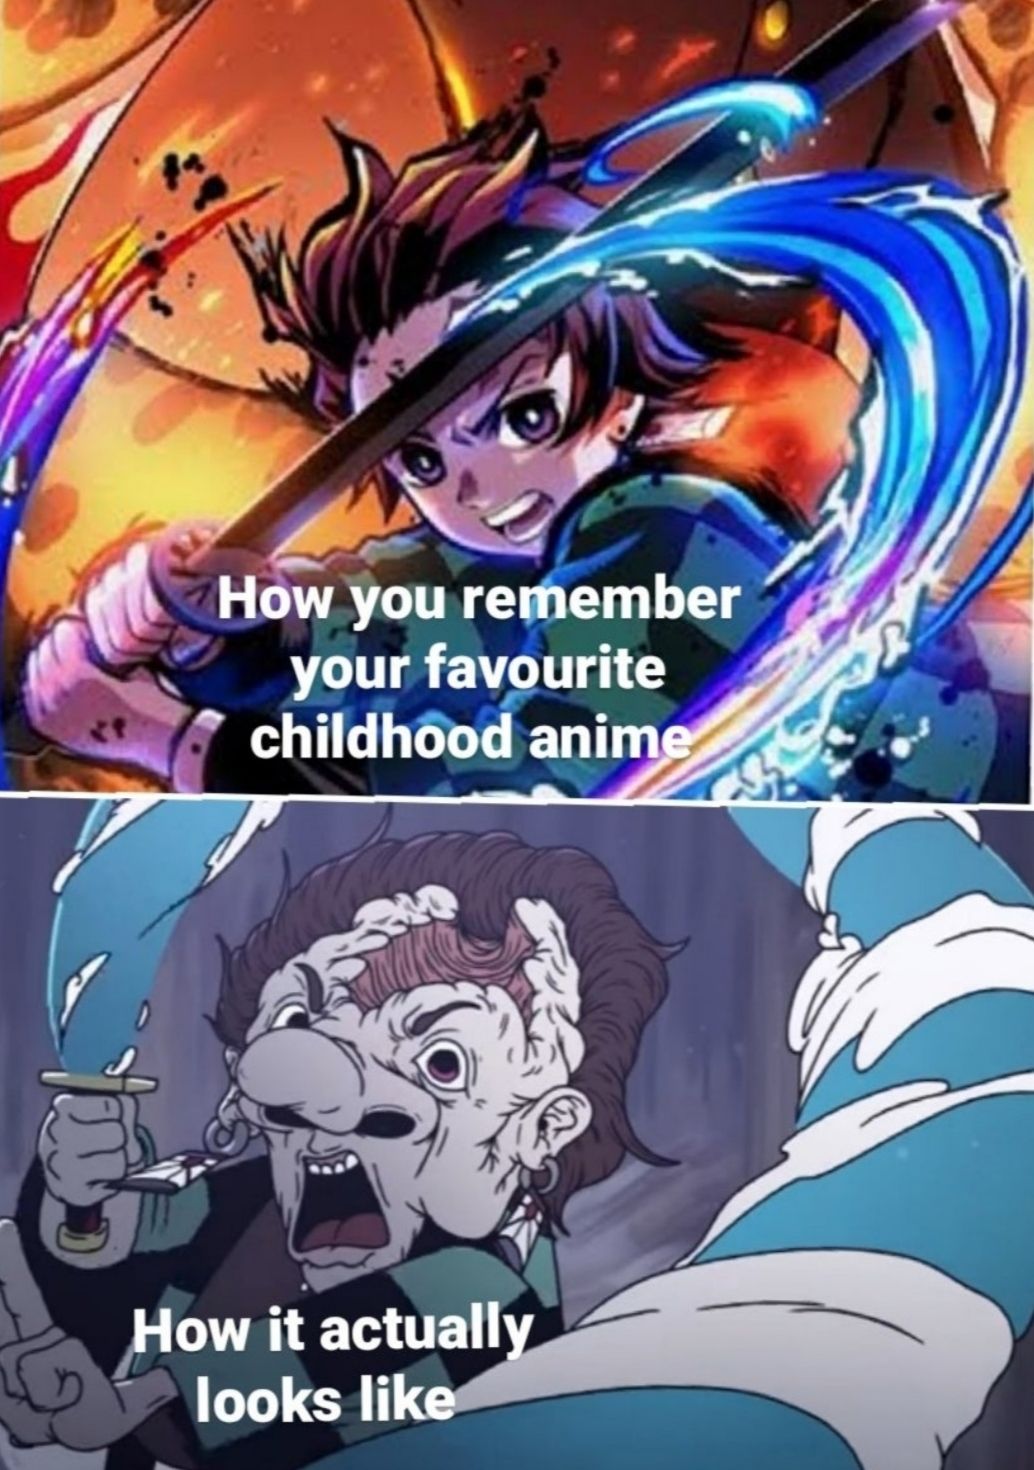 The animation didn't age well